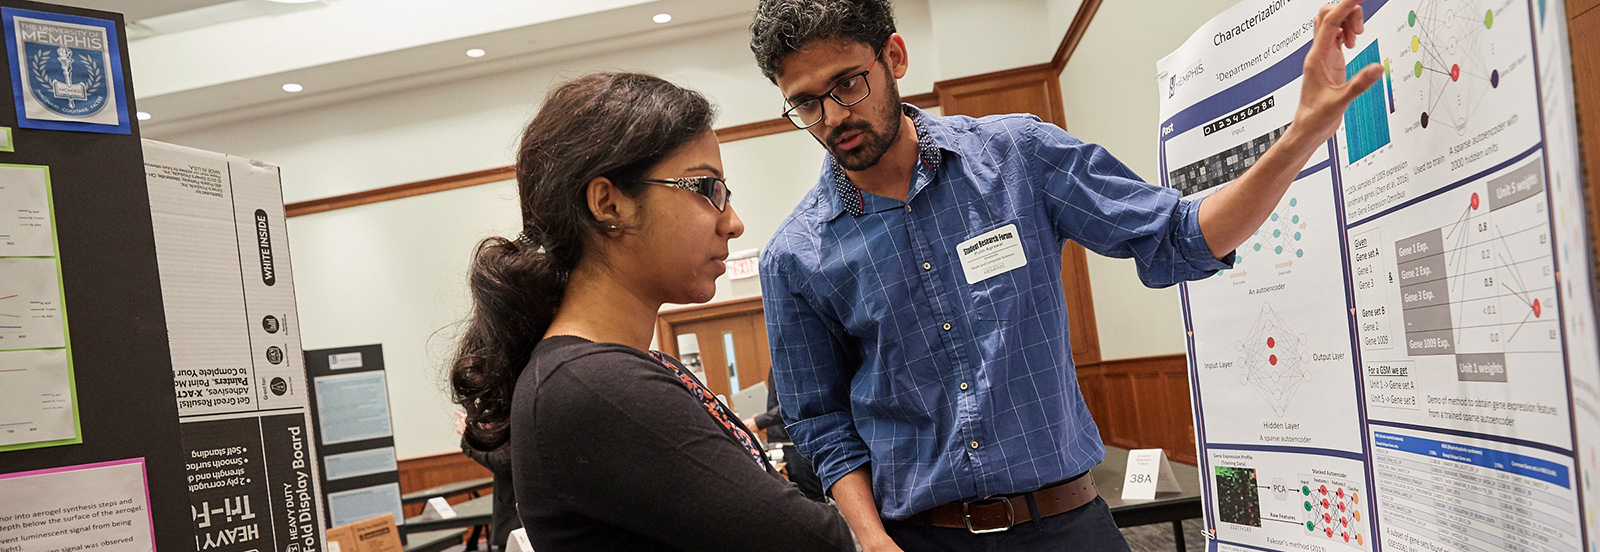 Our advisors and faculty will help you explore your interests and create a plan for SUCCESS!